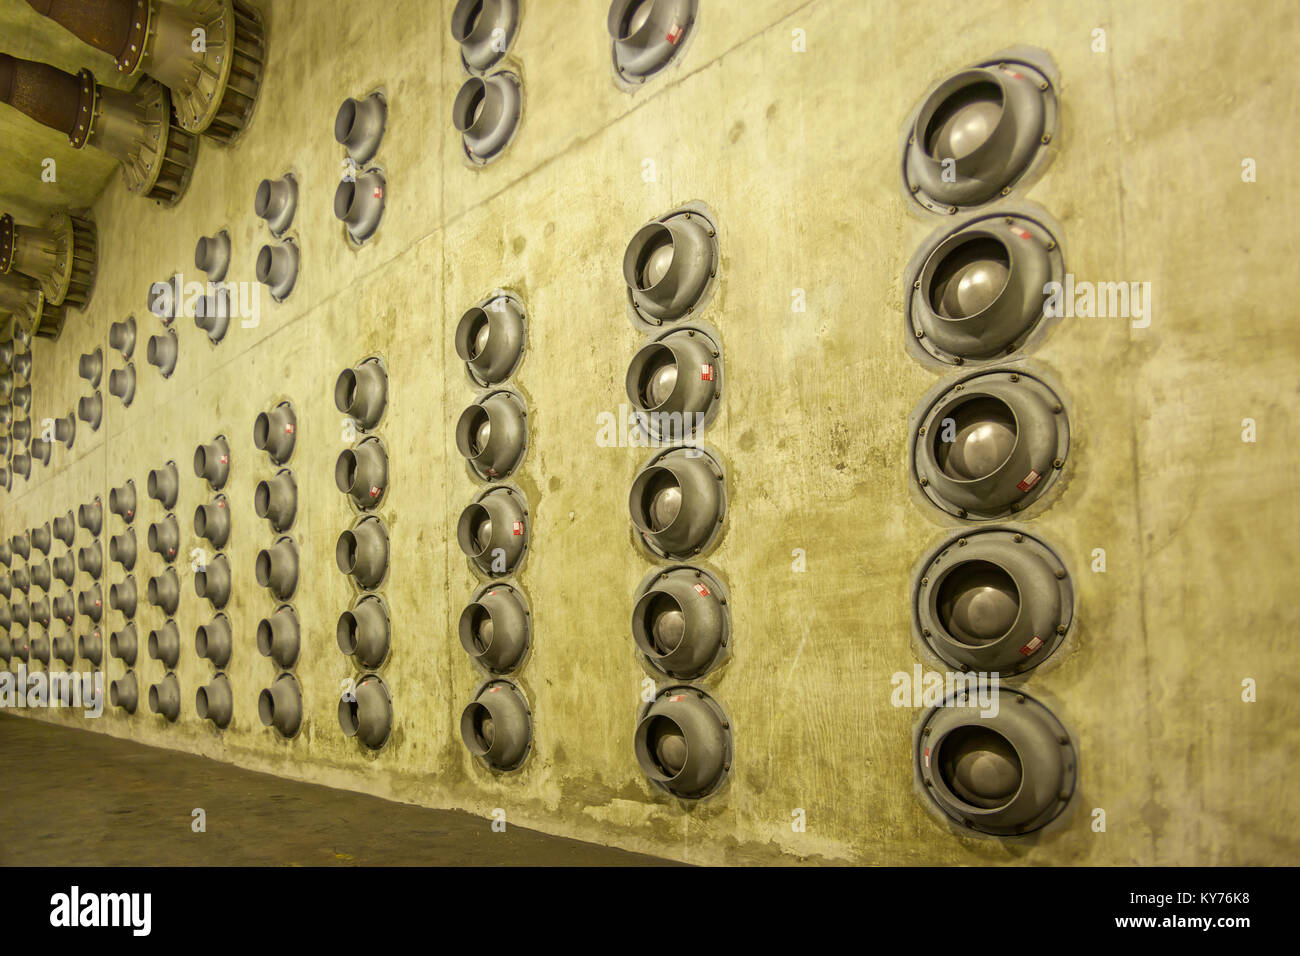 blast Vents in a concrete wall in the underground nuclear bunker Stock Photo